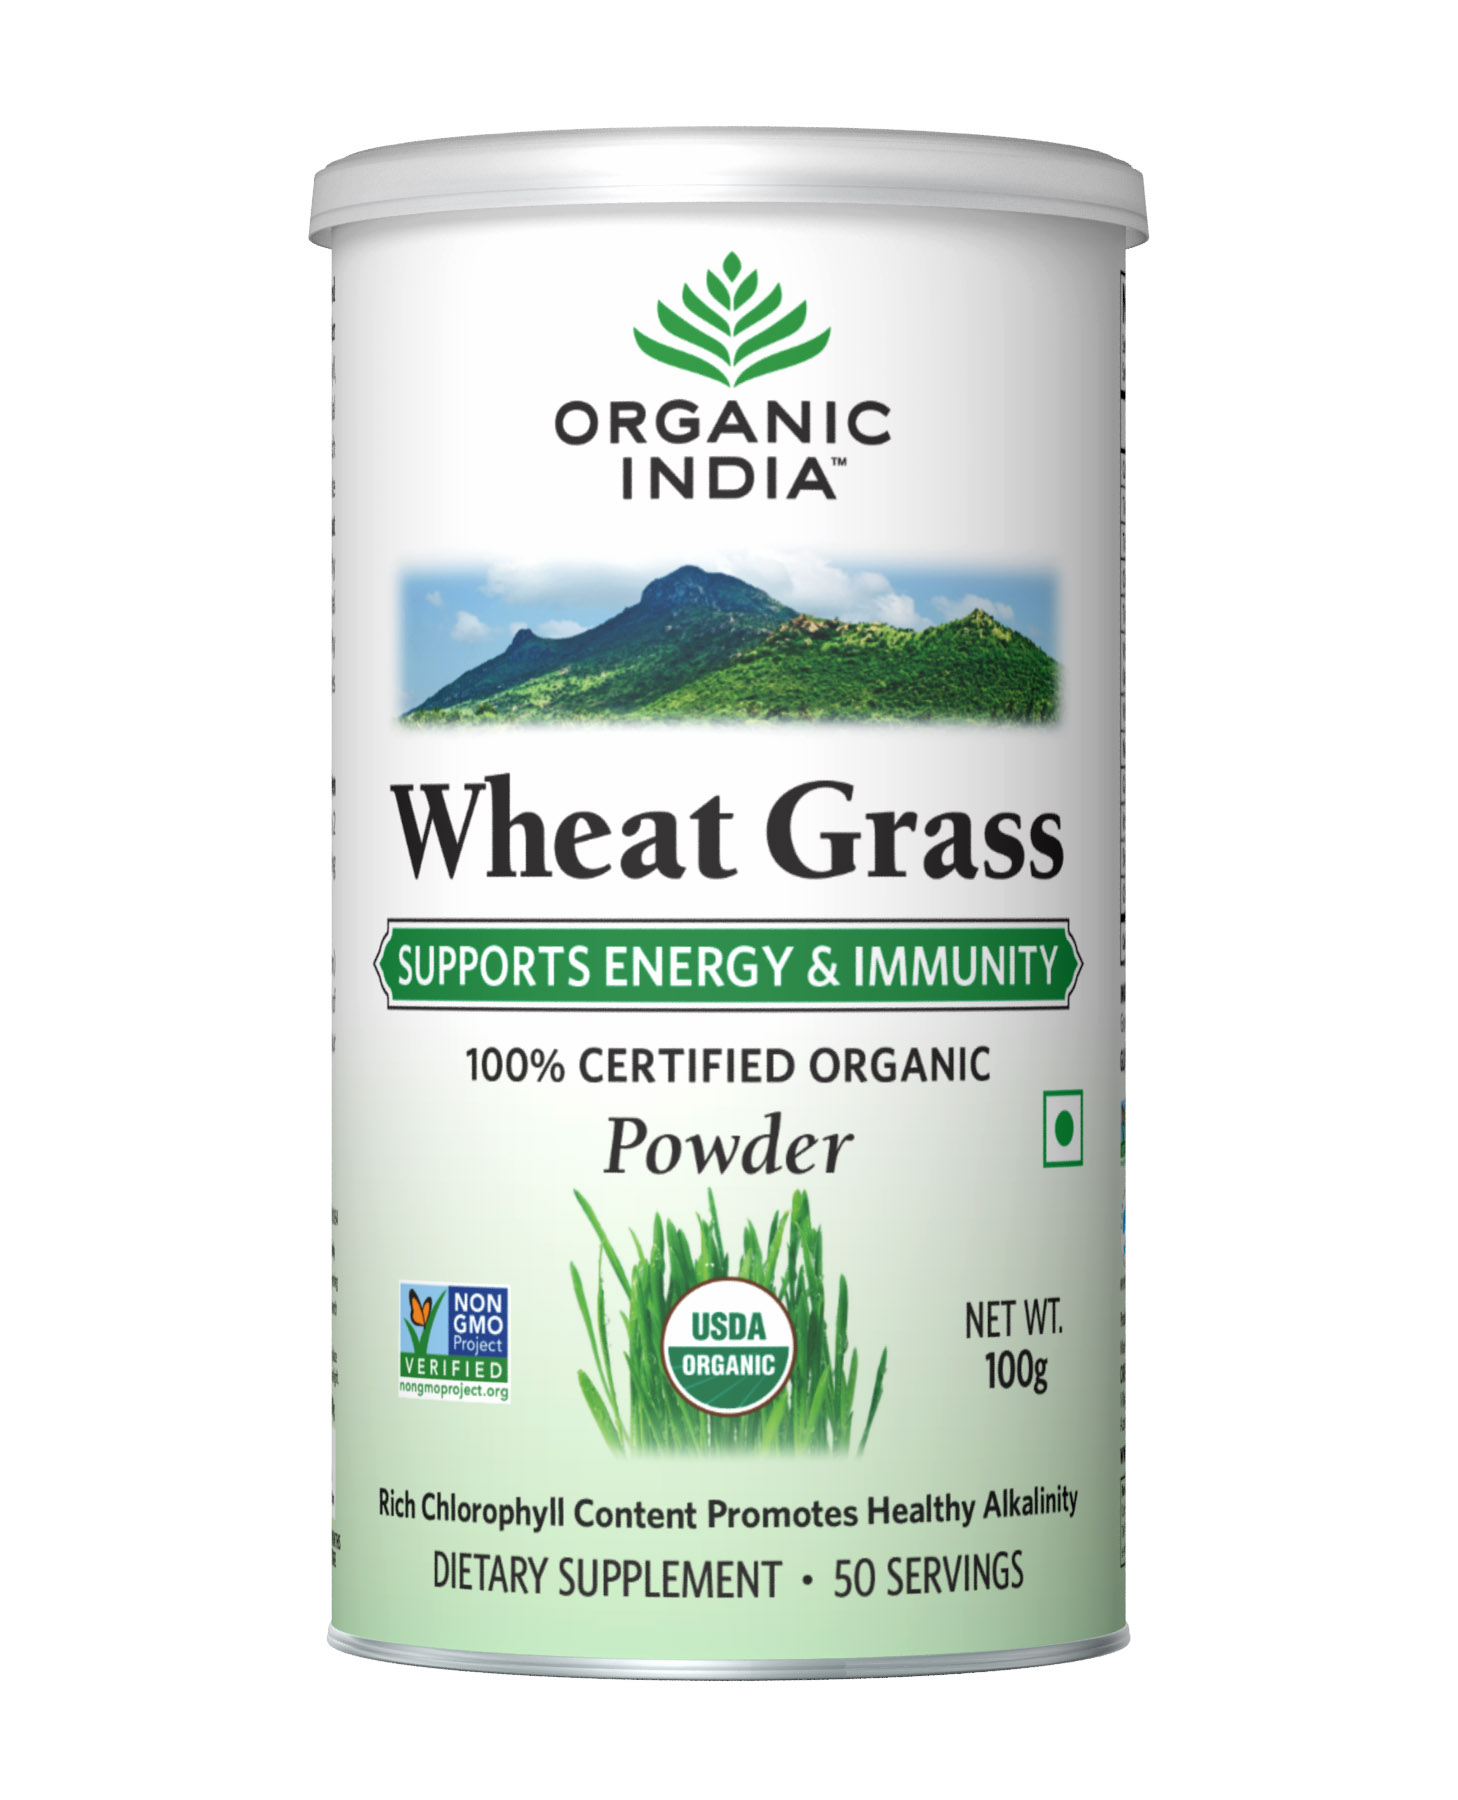 Buy Organic India Wheat Grass at Best Price Online